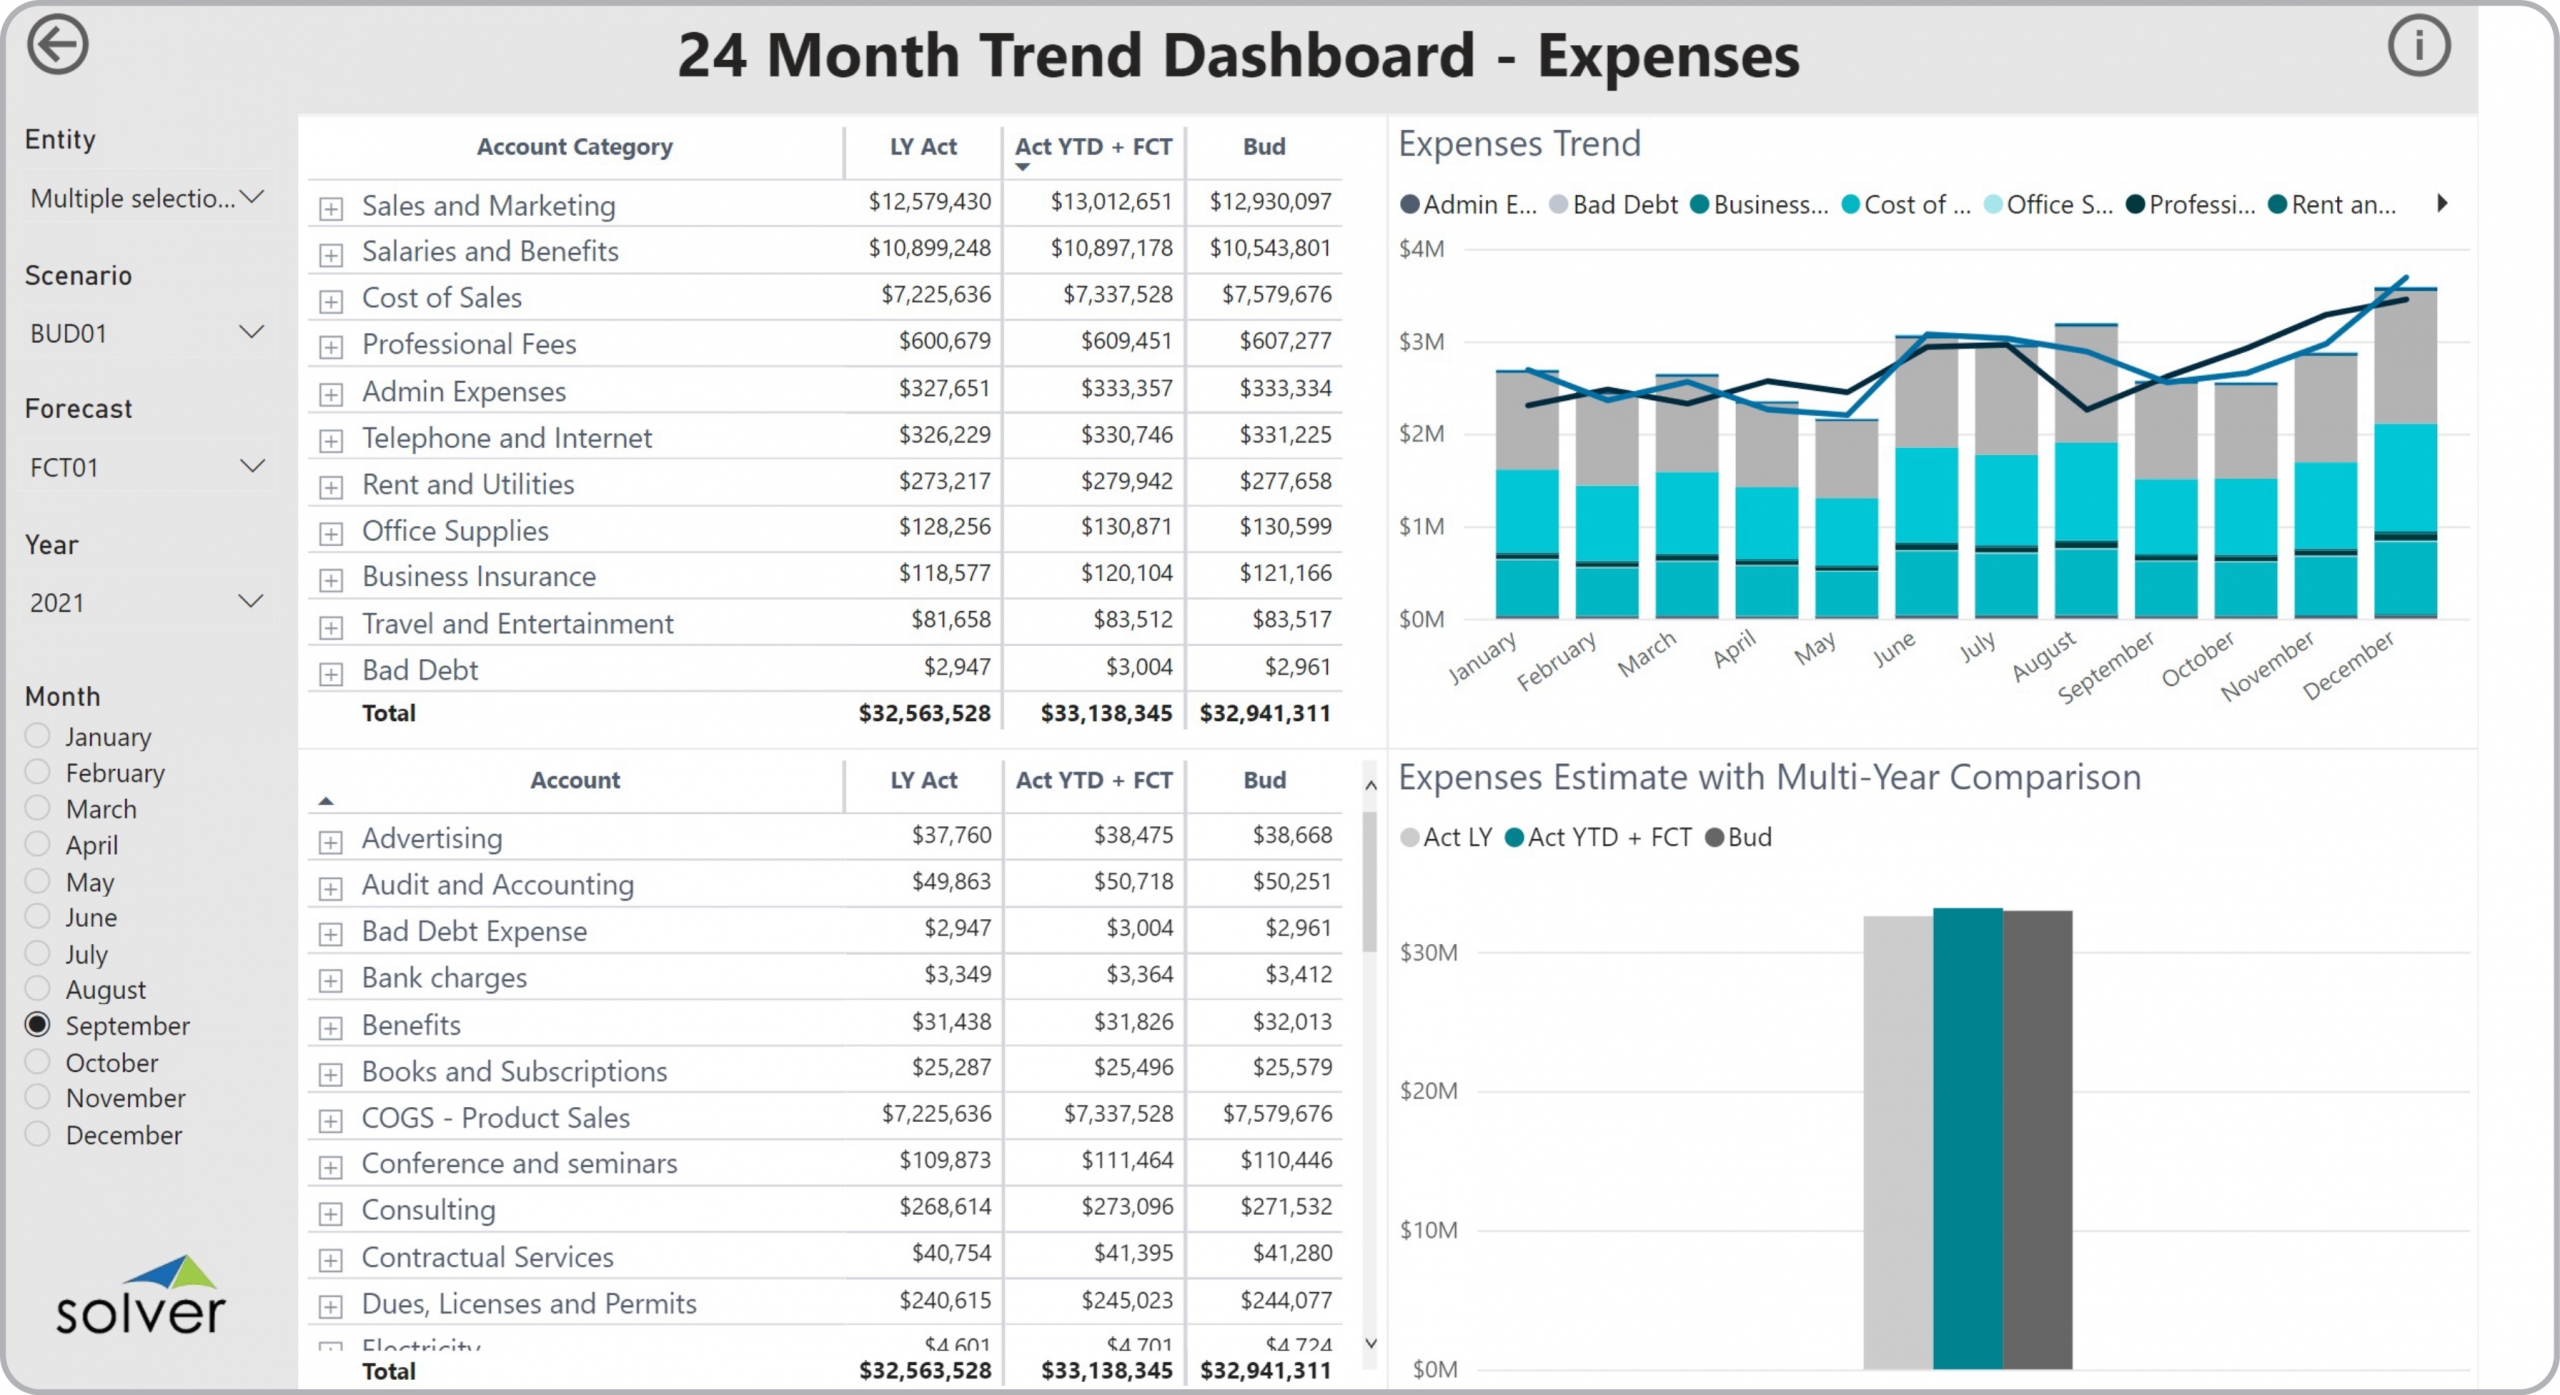 Example of a 24 Month Expense Trend Dashboard to Streamline the Monthly Reporting Process